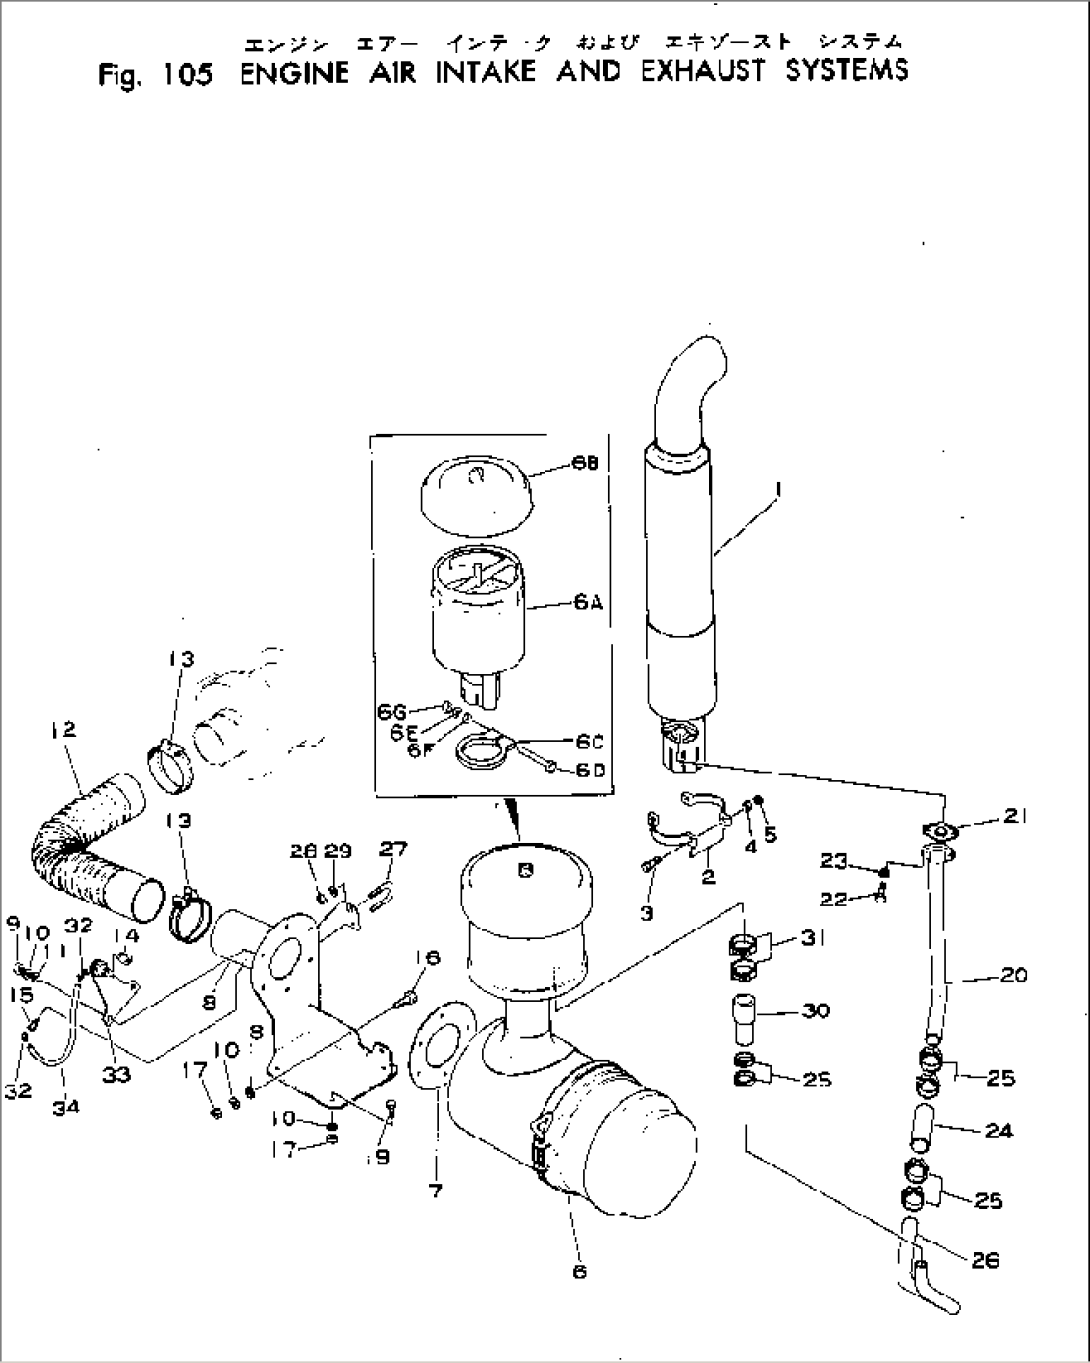 ENGINE AIR INTAKE AND EXHAUST SYSTEM